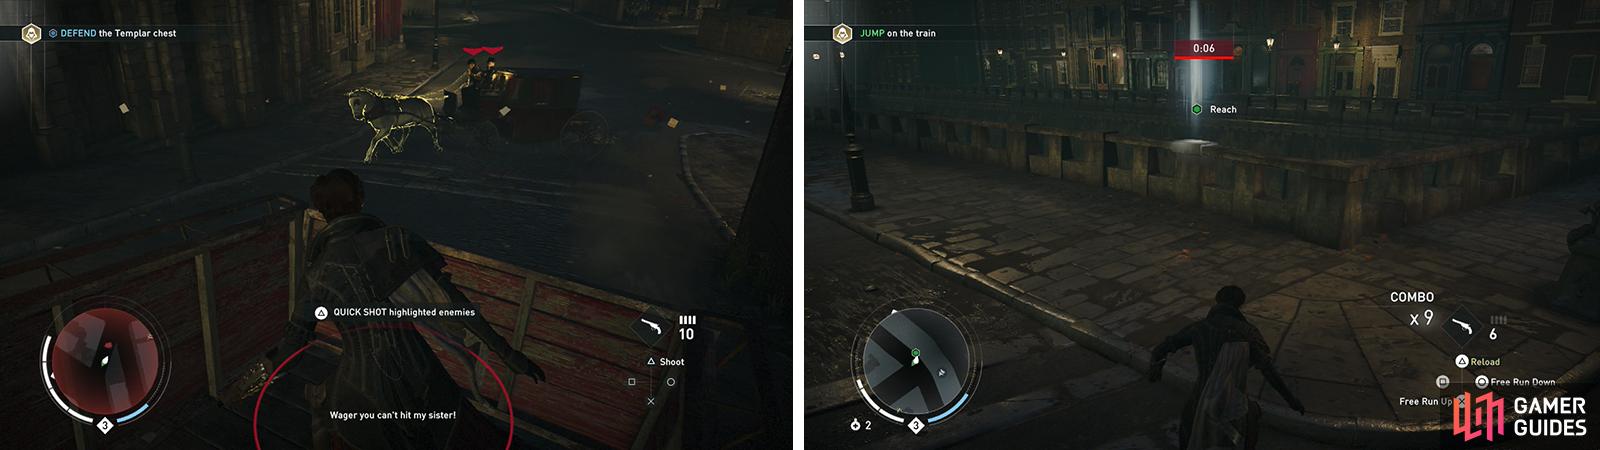 During the chase, shoot the horses (left) to take out enemies quicker. At the end of the chase, exit the cart and reach the marker (right)